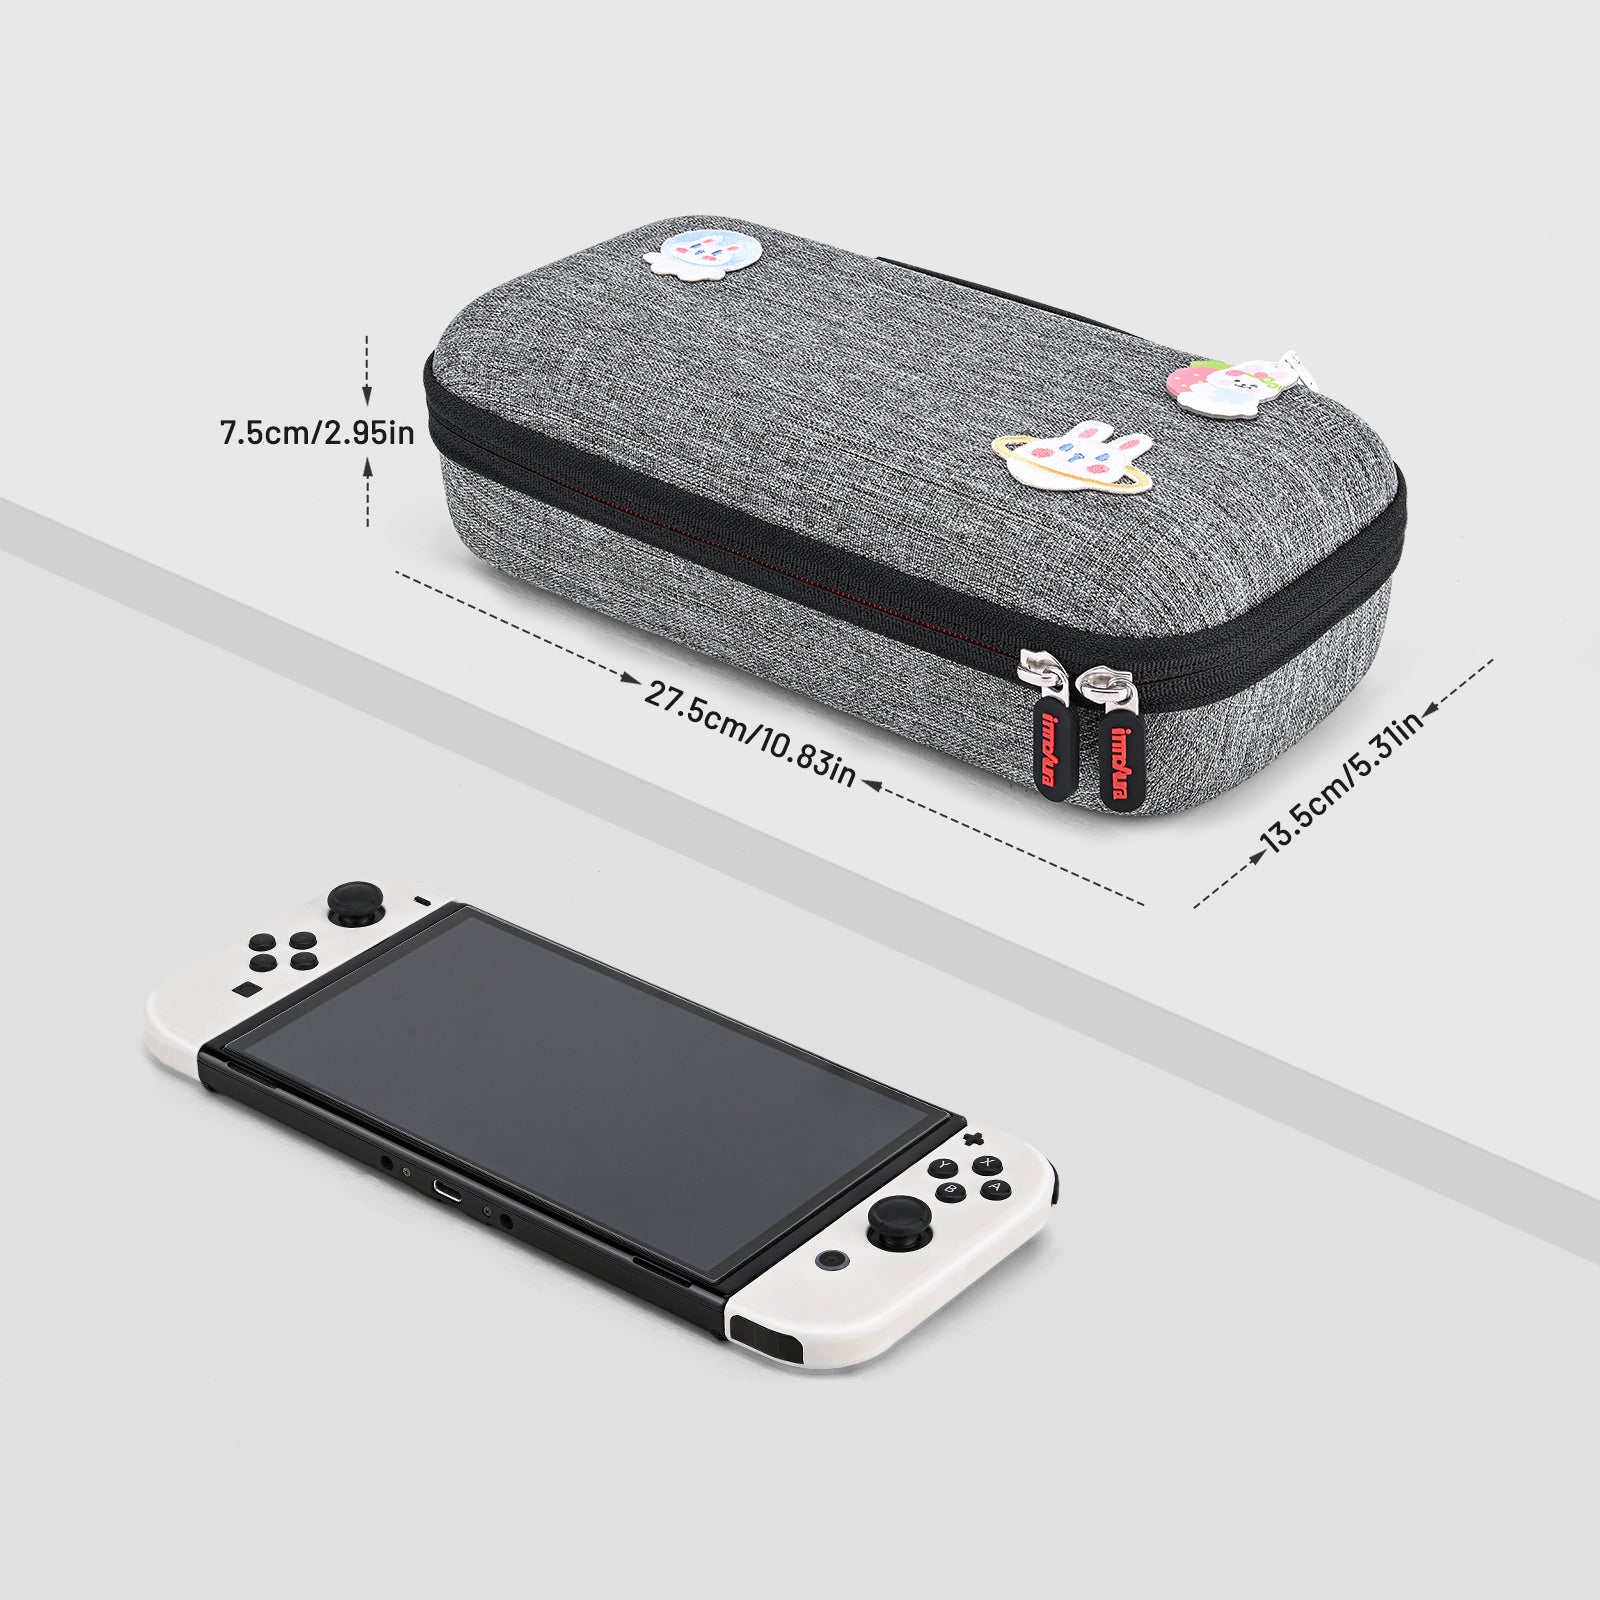 innoAura Carrying Case for Nintendo Switch OLED Gift Choice for Gamer